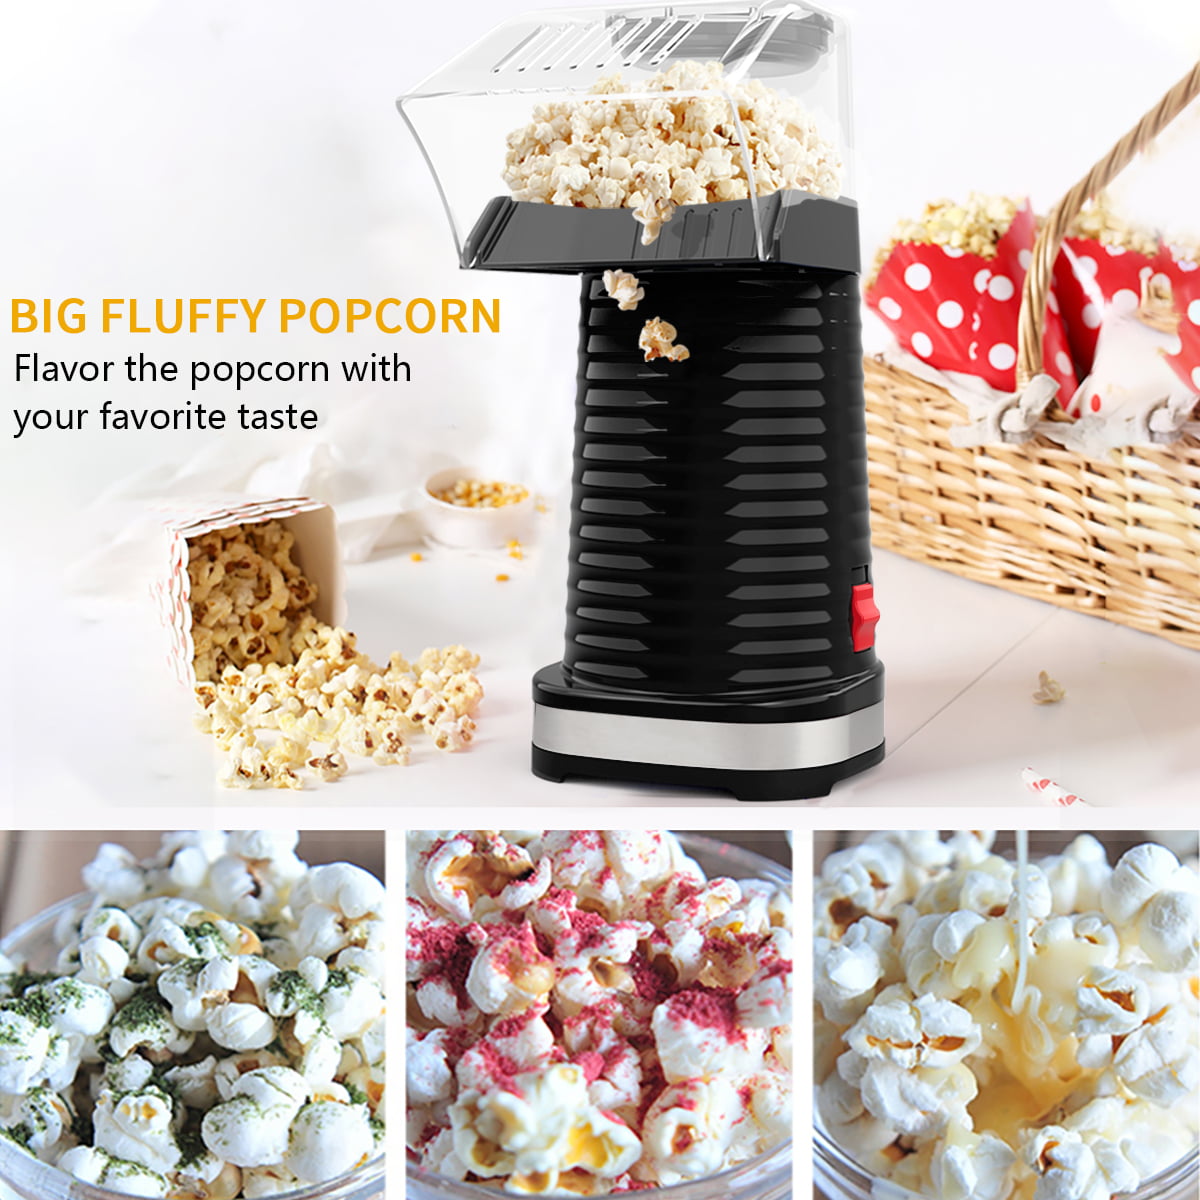 Sboly Popcorn Machine, 3 Minutes Fast No Oil Healthy Hot Air Popcorn Popper  for Kids Adults, Popcorn Maker Great for Party and Watching Movies, 1200W,  Red 